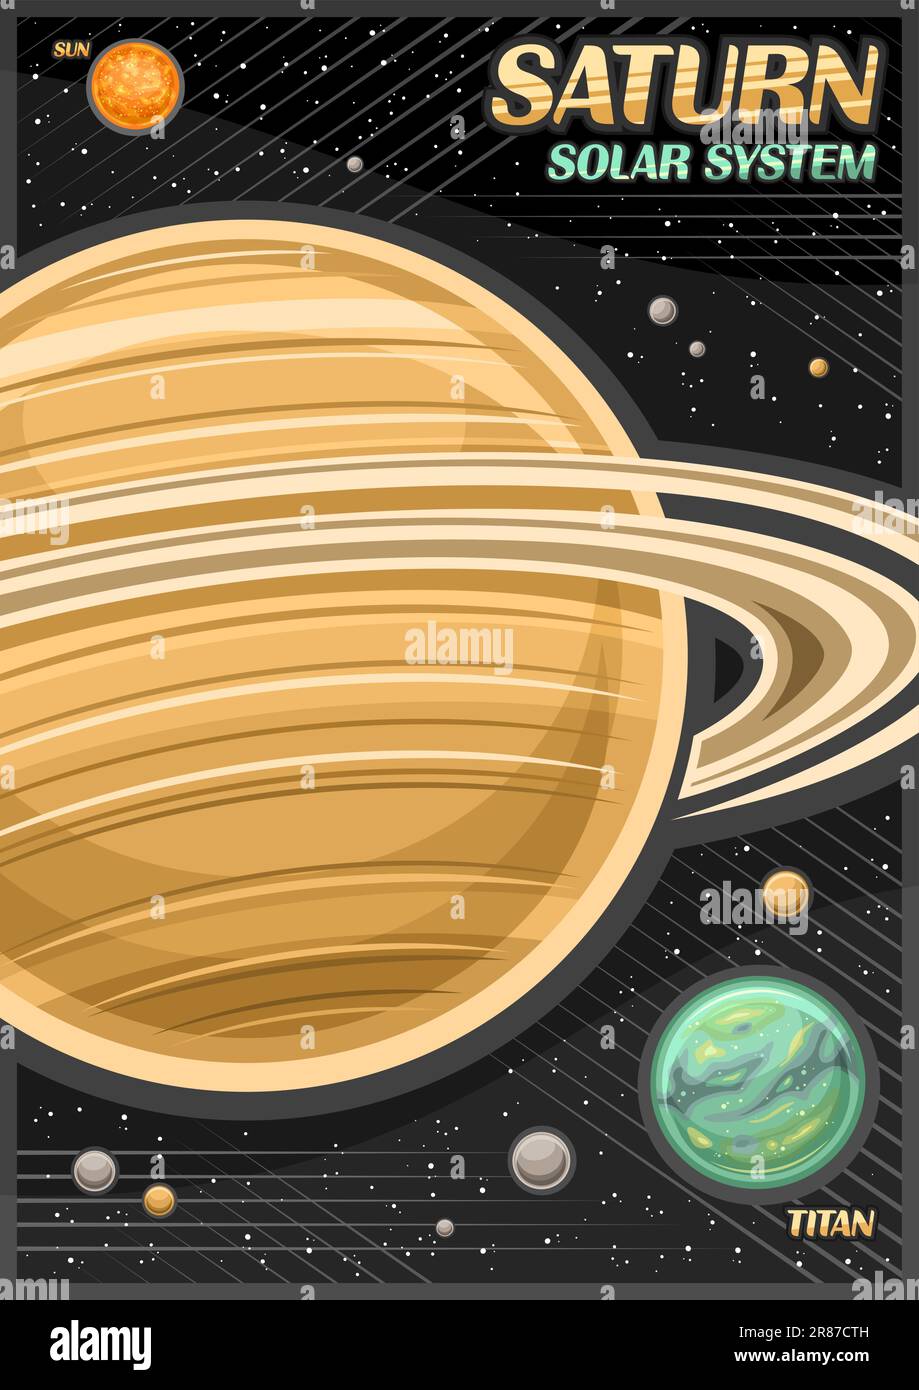 Vector Poster for Saturn, vertical banner with illustration of rotating satellites around cartoon saturn planet on black starry background, decorative Stock Vector